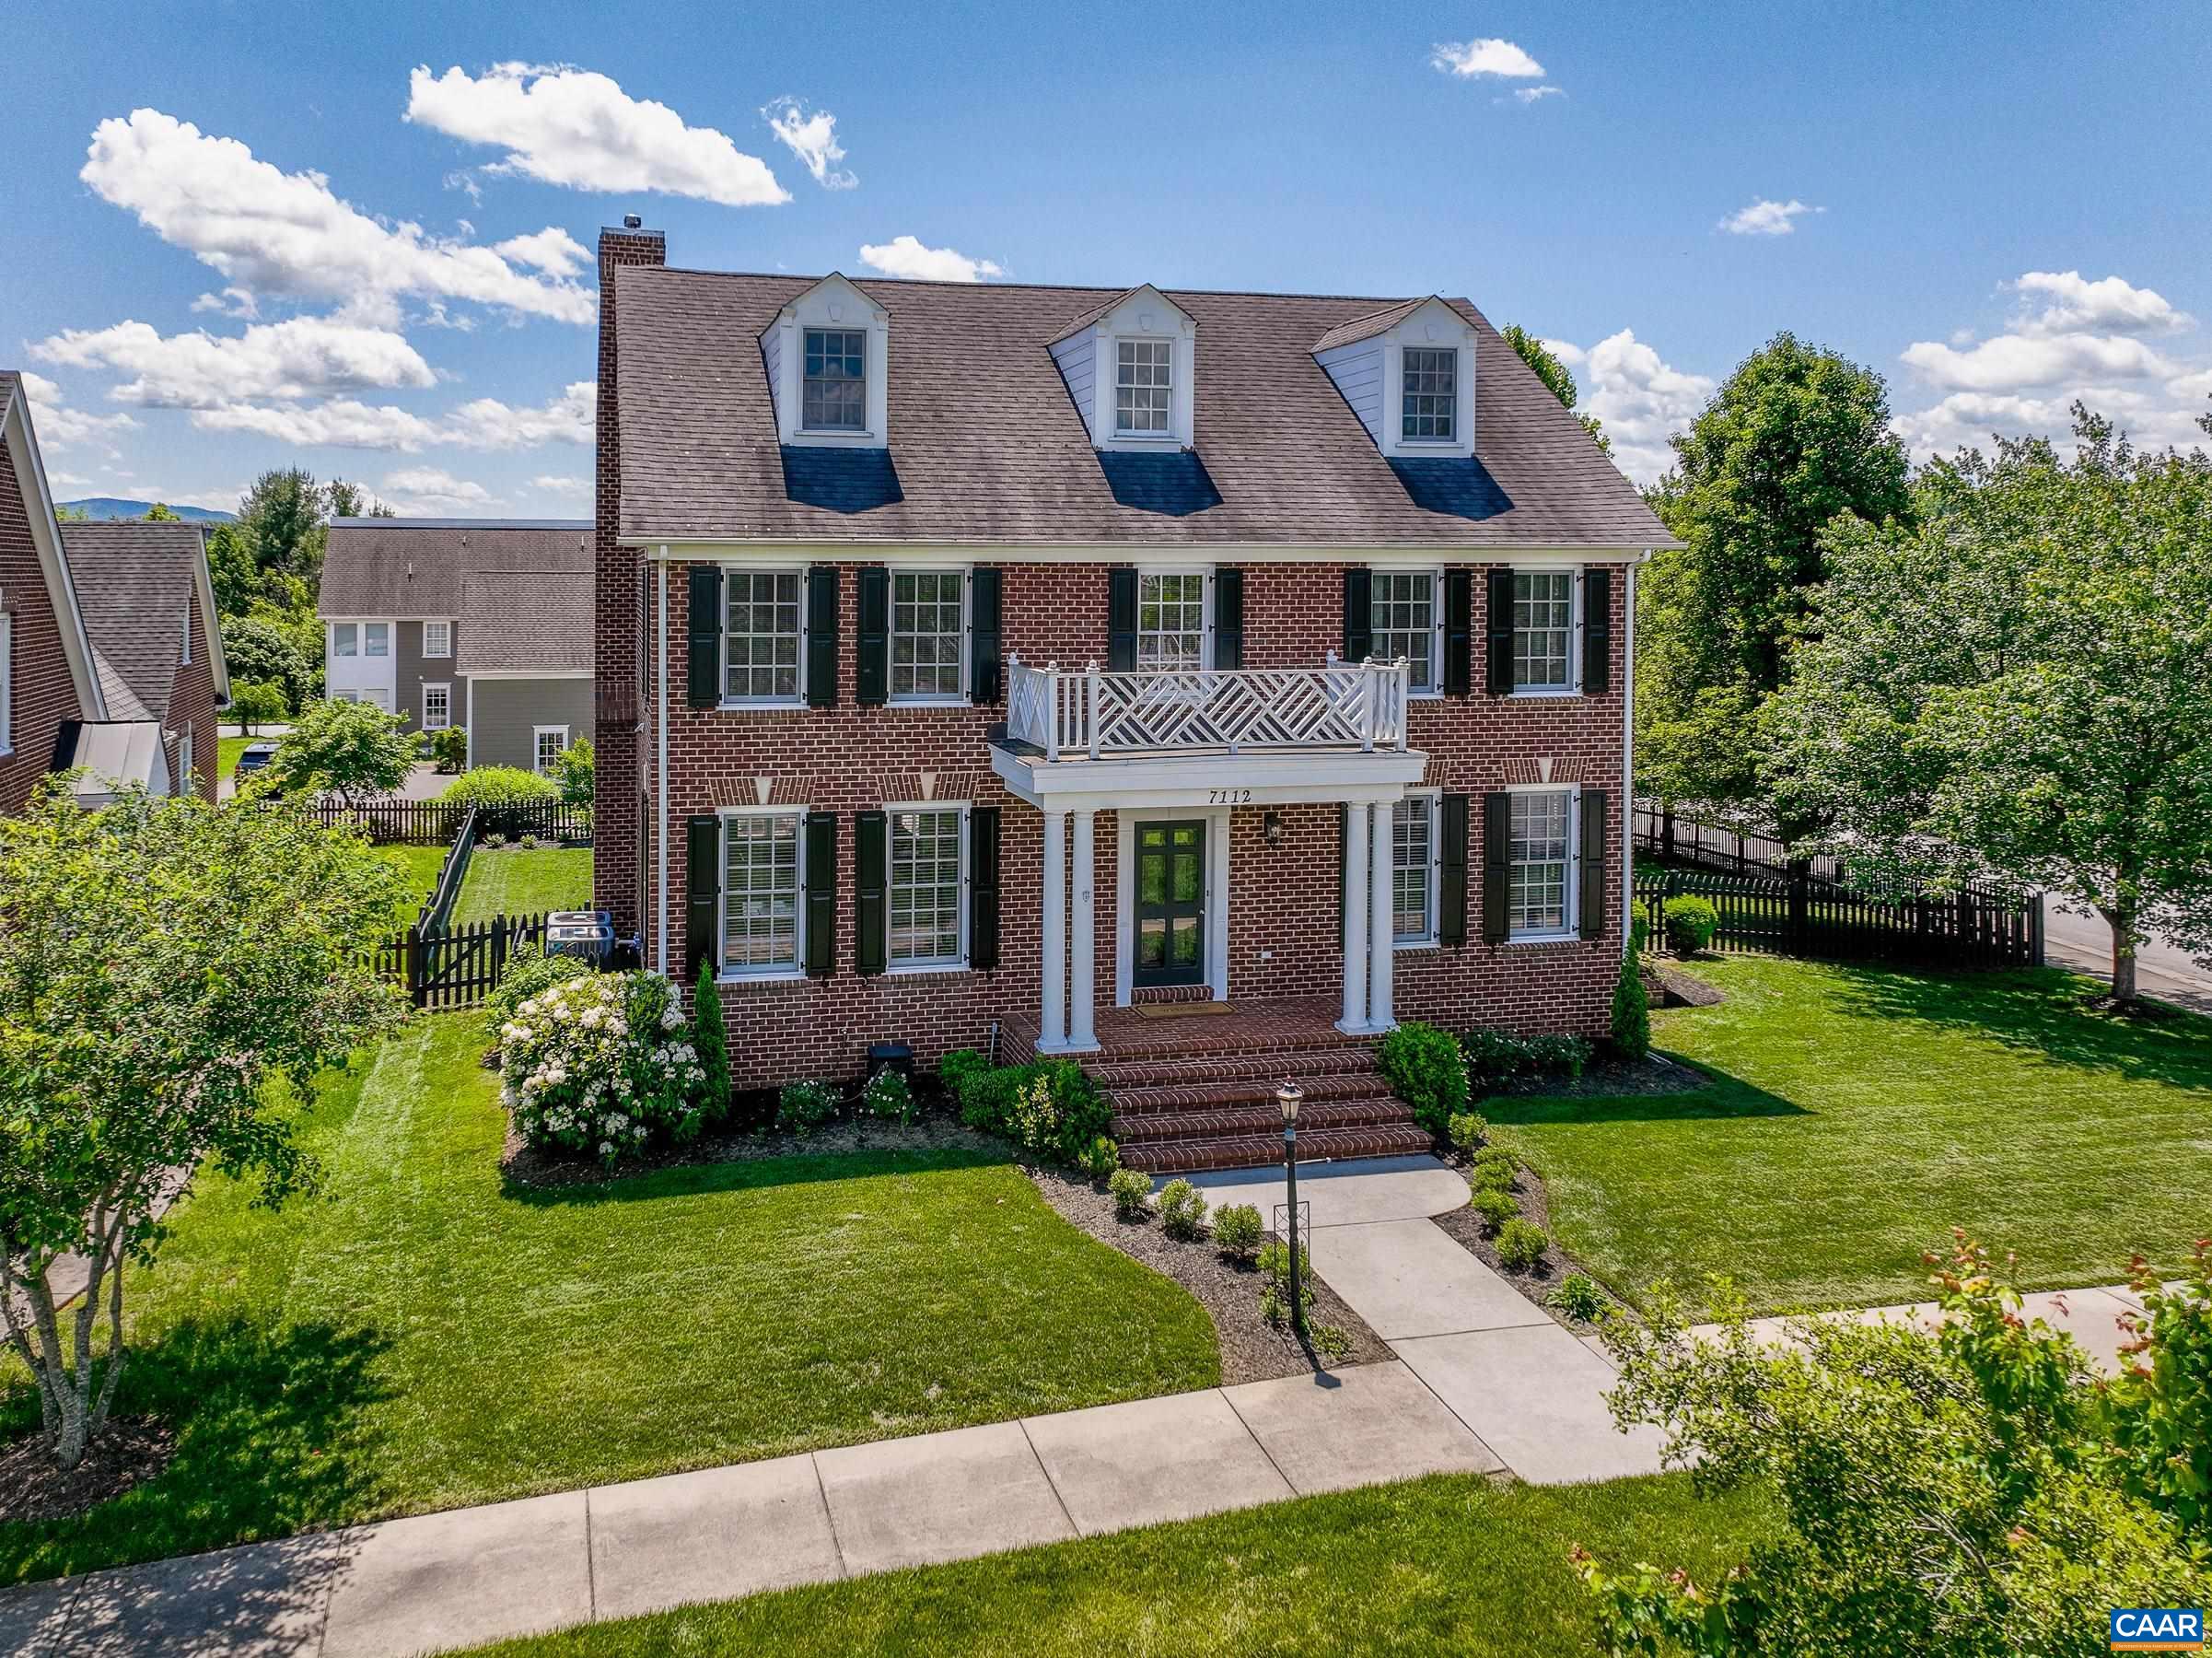 Elegant brick home in the heart of Old Trail with mature trees and plantings.